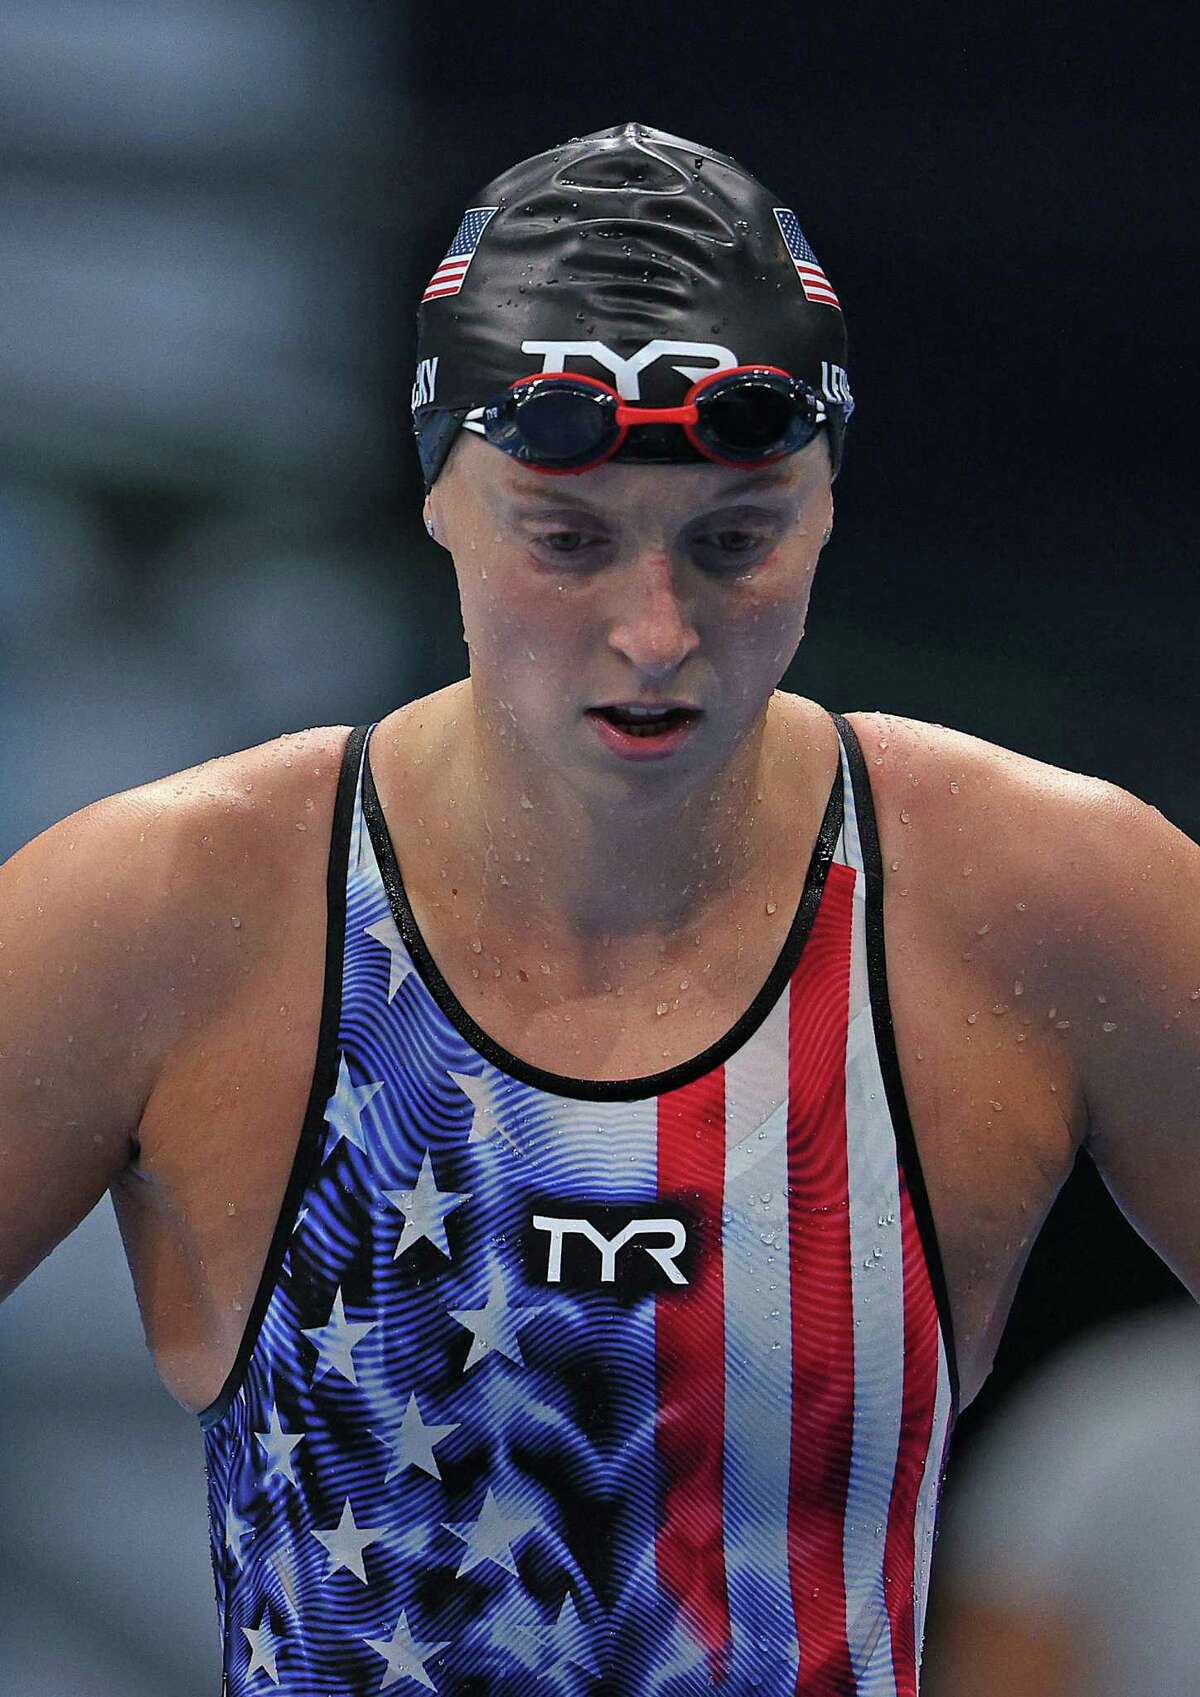 Earning gold again, Katie Ledecky reminds Olympics fans she's still a